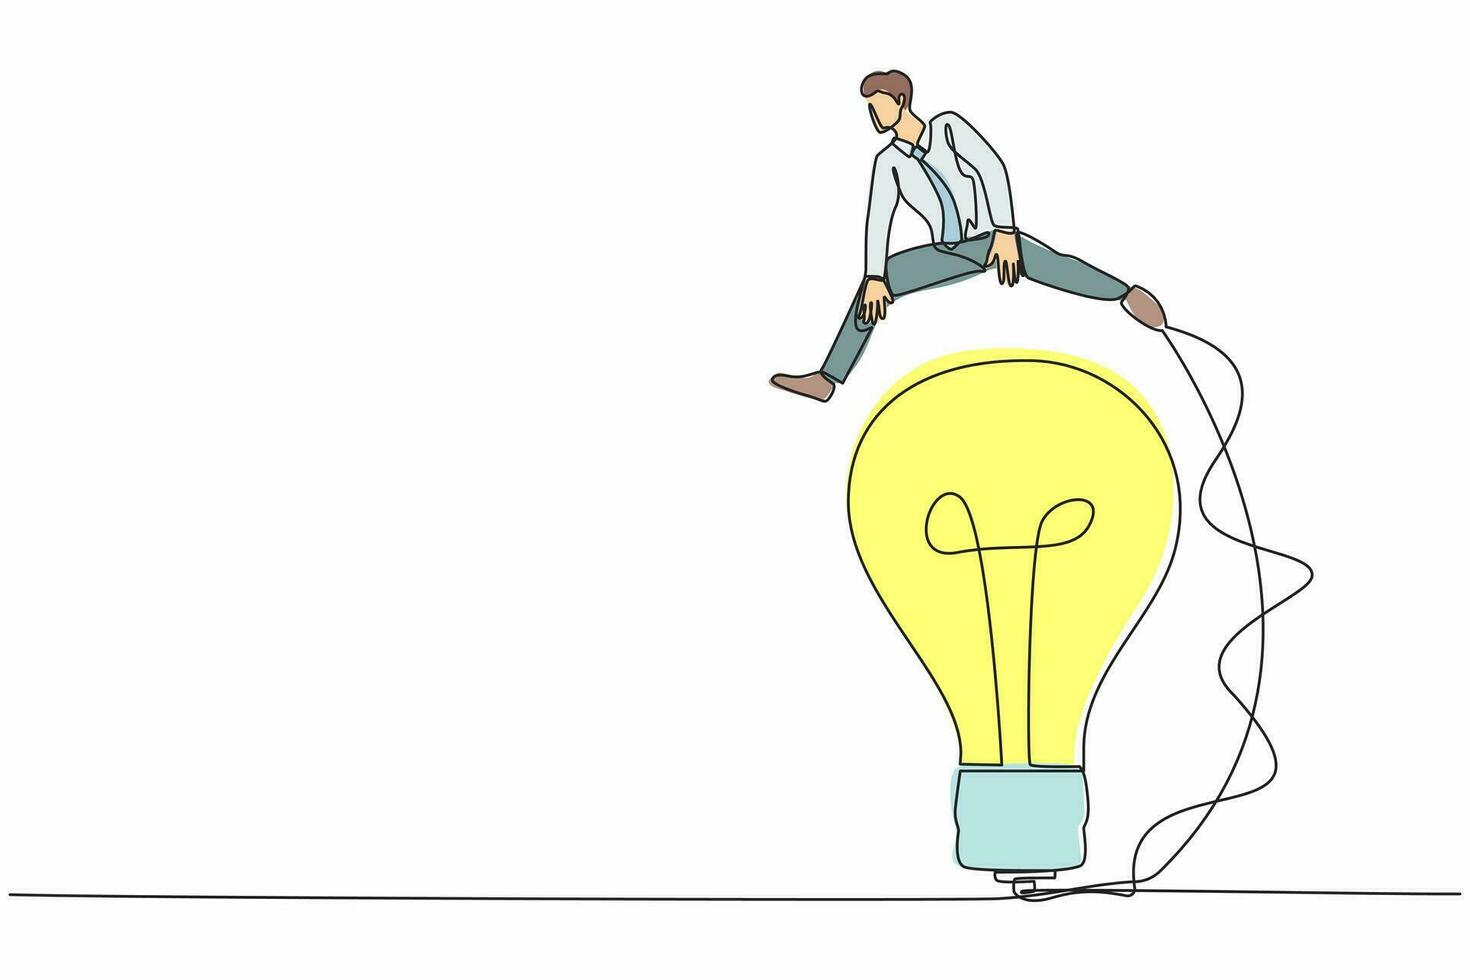 Single one line drawing businessman jumping over big light bulb. Business innovation transformation. Adaptation creativity to move beyond original idea. Continuous line draw design vector illustration